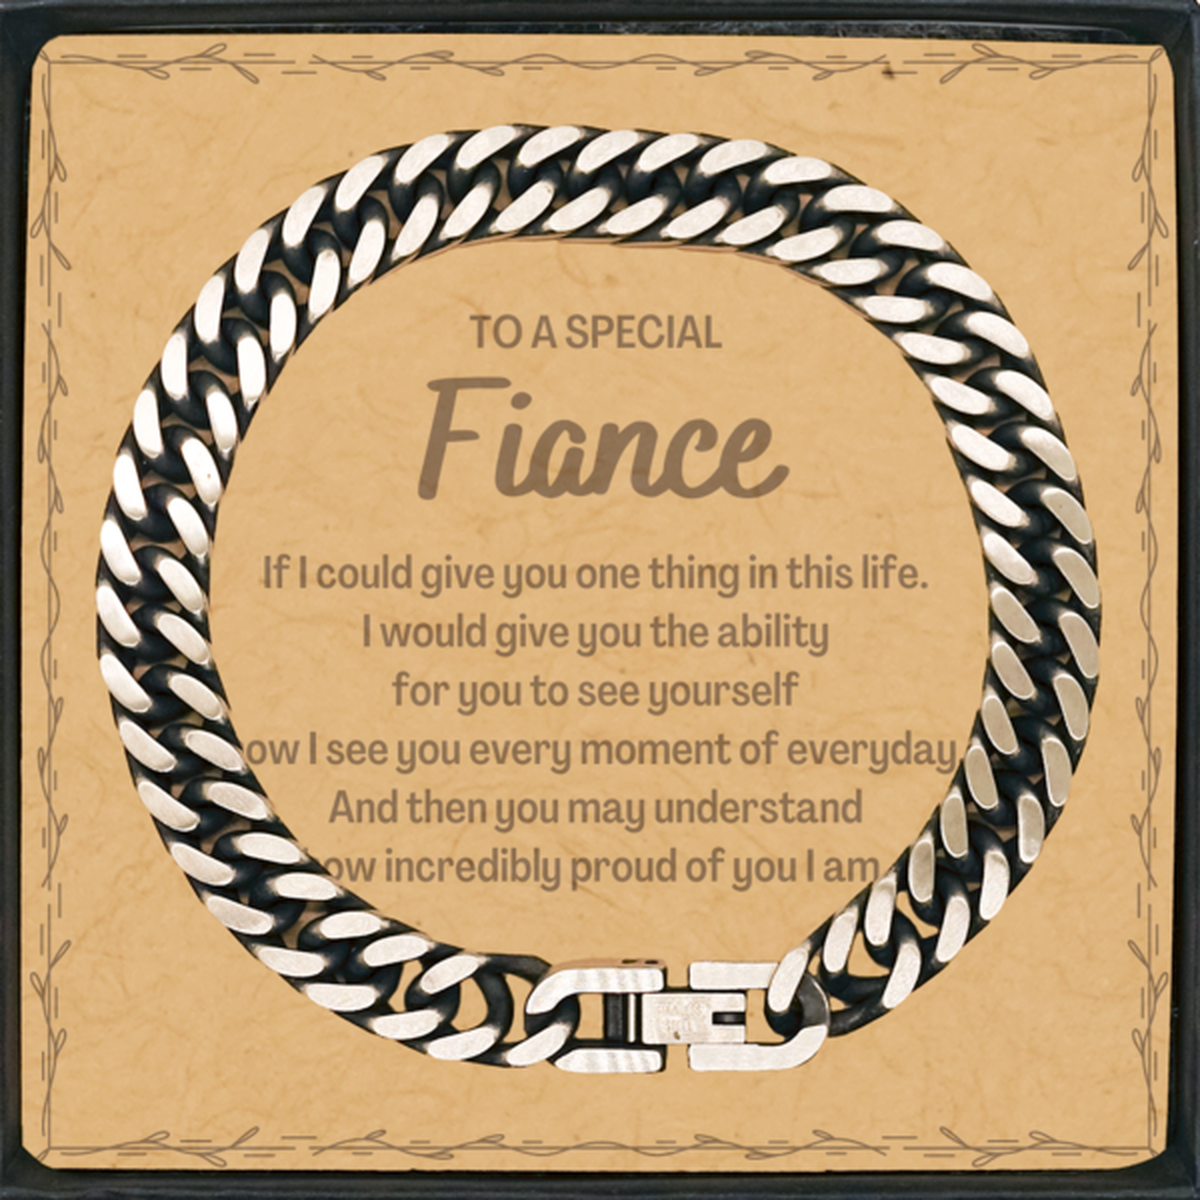 To My Fiance Cuban Link Chain Bracelet, Gifts For Fiance Message Card, Inspirational Gifts for Christmas Birthday, Epic Gifts for Fiance To A Special Fiance how incredibly proud of you I am